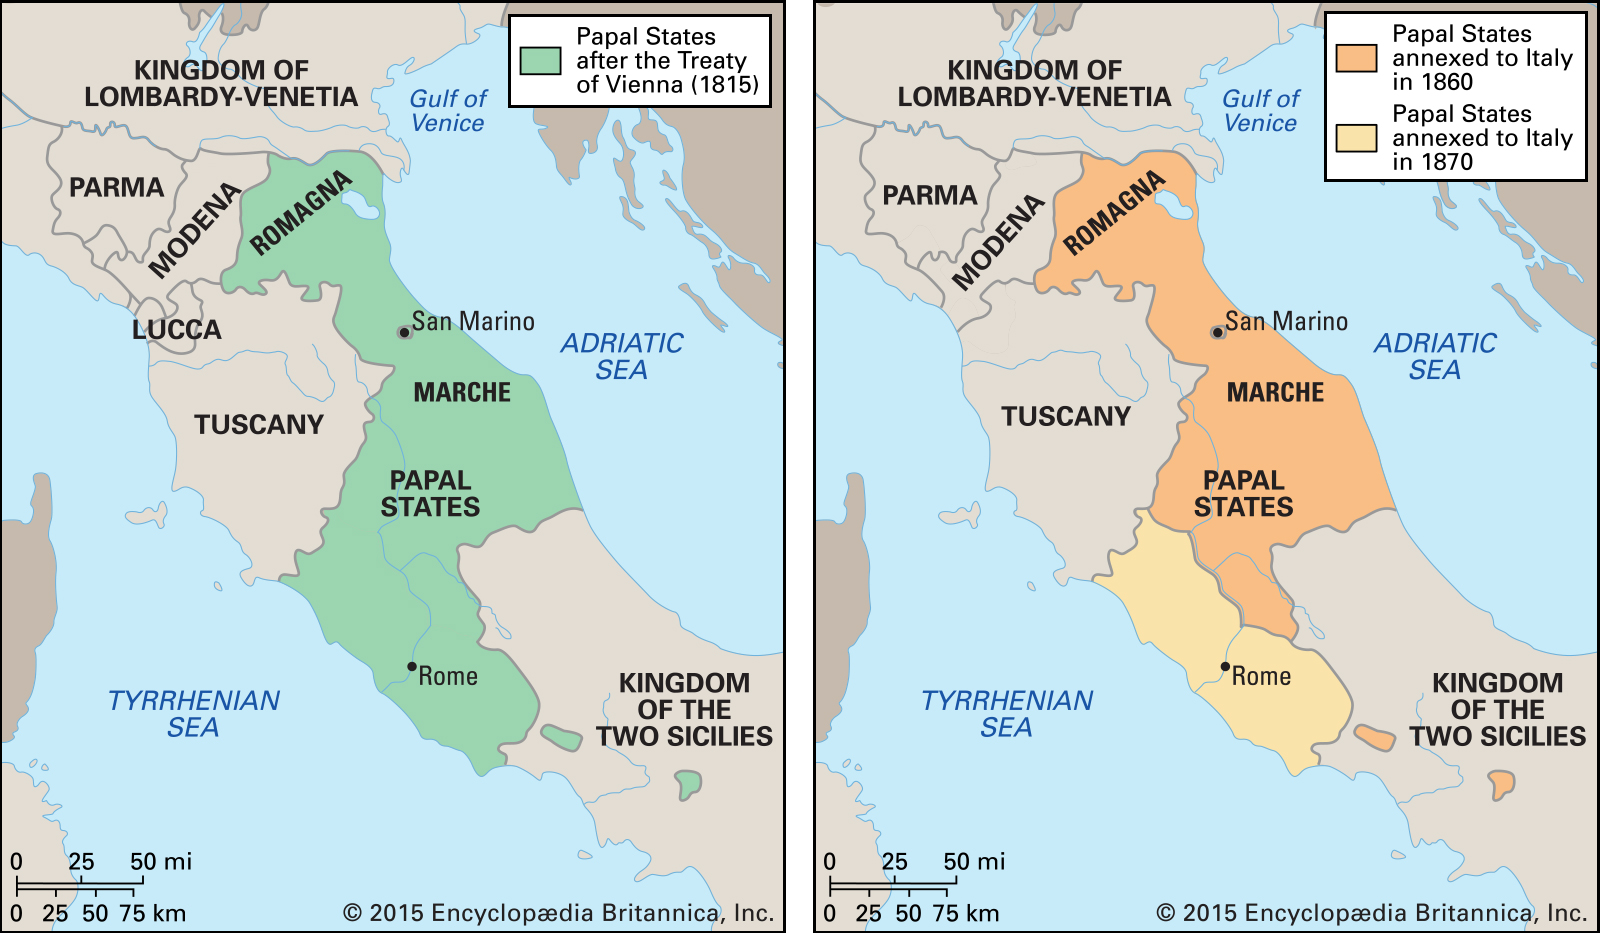 Papal-States-annexation-Italy-1870.jpg